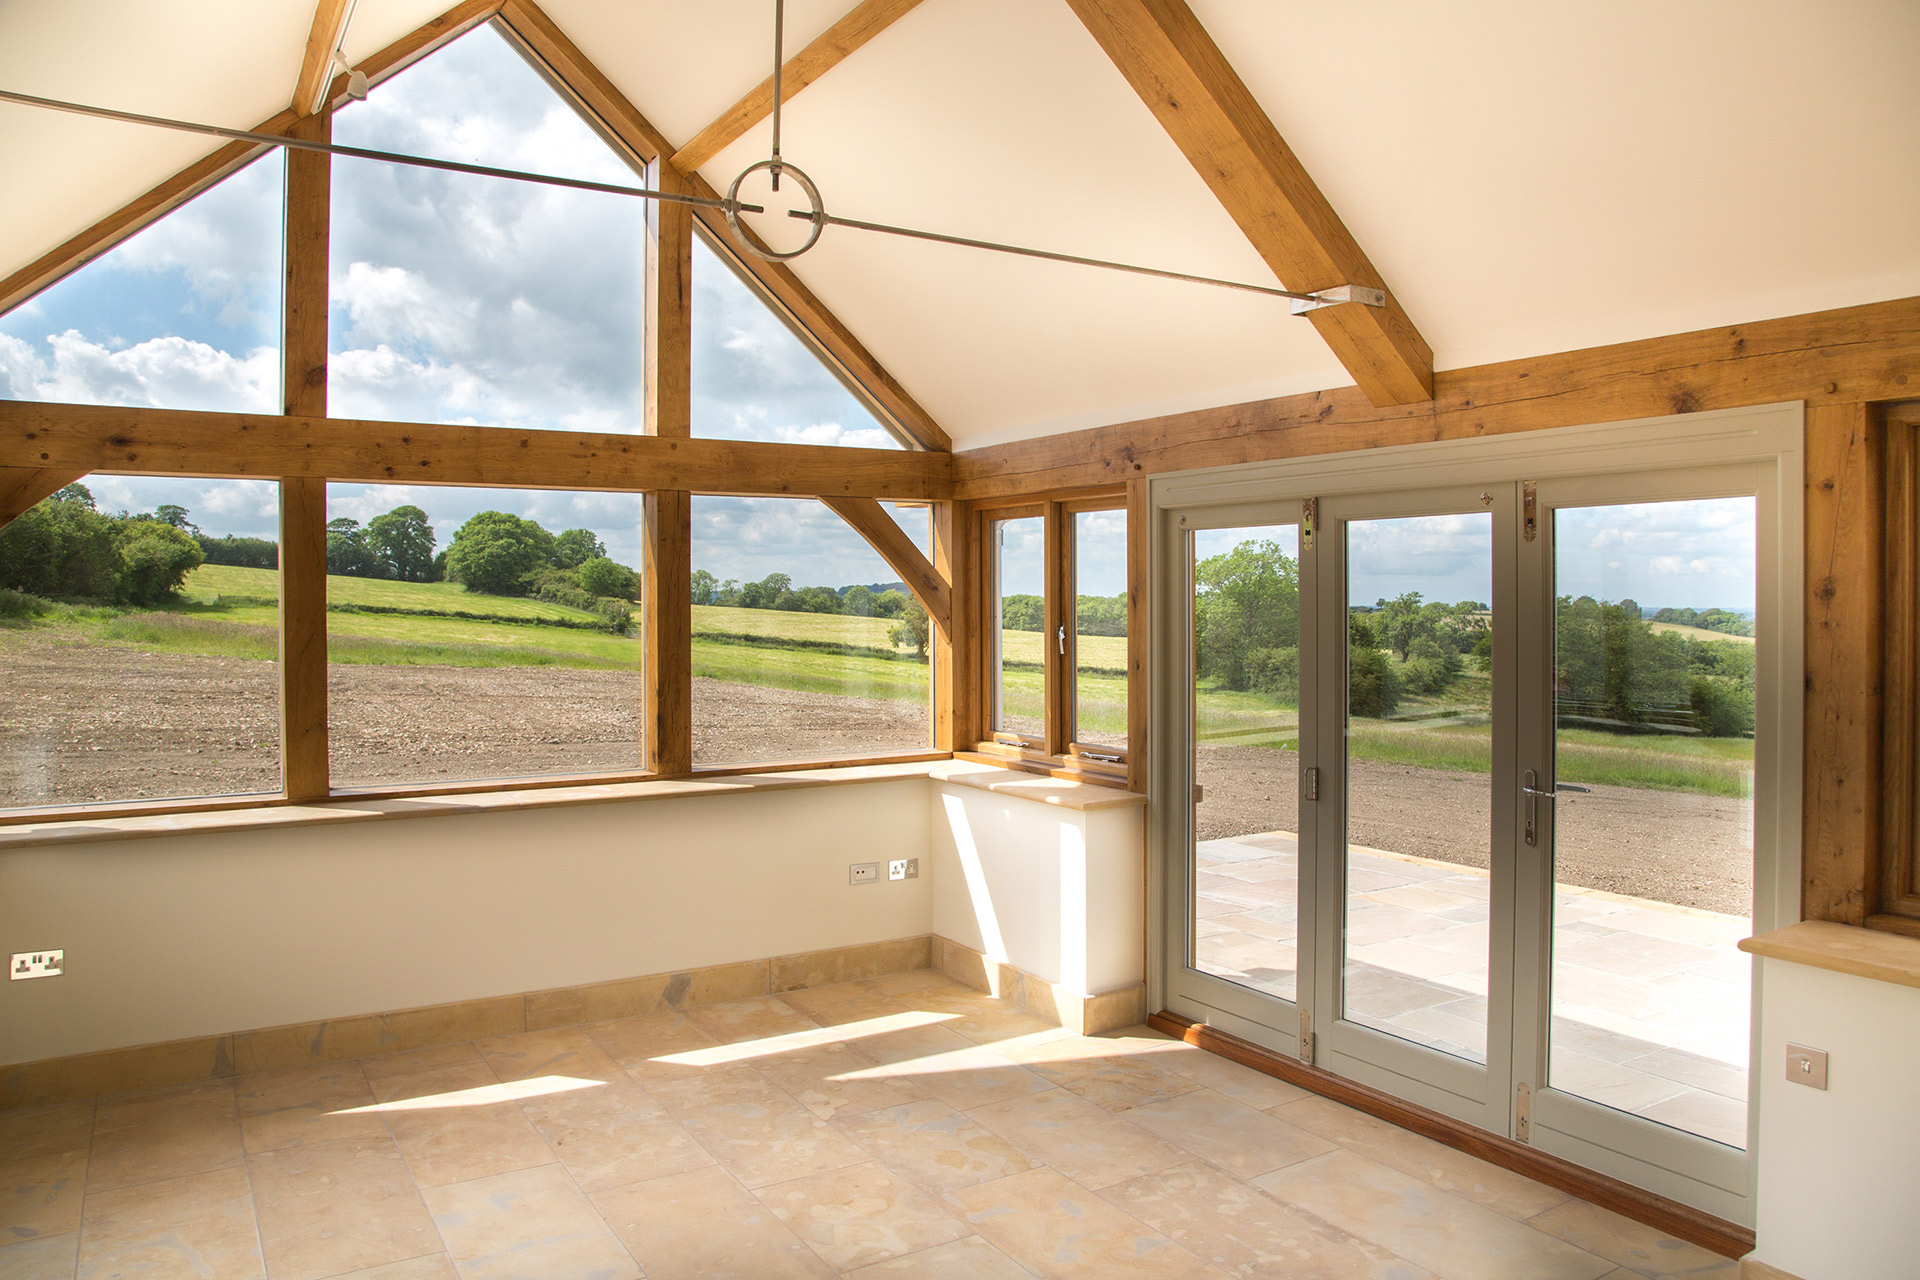 interior photo of sunroom with exposed wooden beams and beautiful countryside views